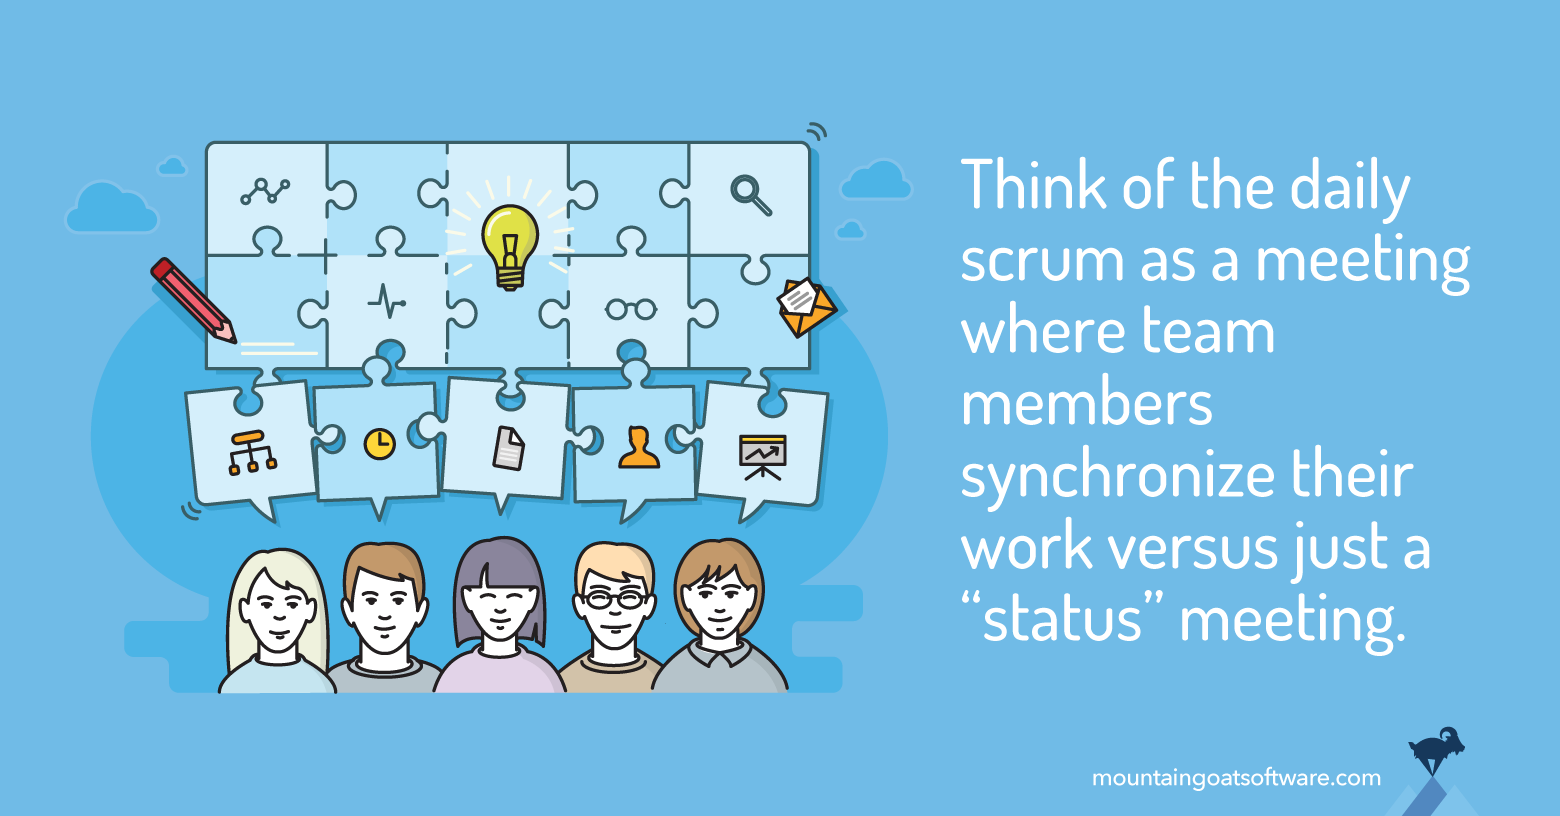 In a daily scrum, each member of a small scrum team describes their individual piece of work in the larger sprint puzzle. Think of the daily scrum as a meeting where team members synchronize their work versus just a status meeting